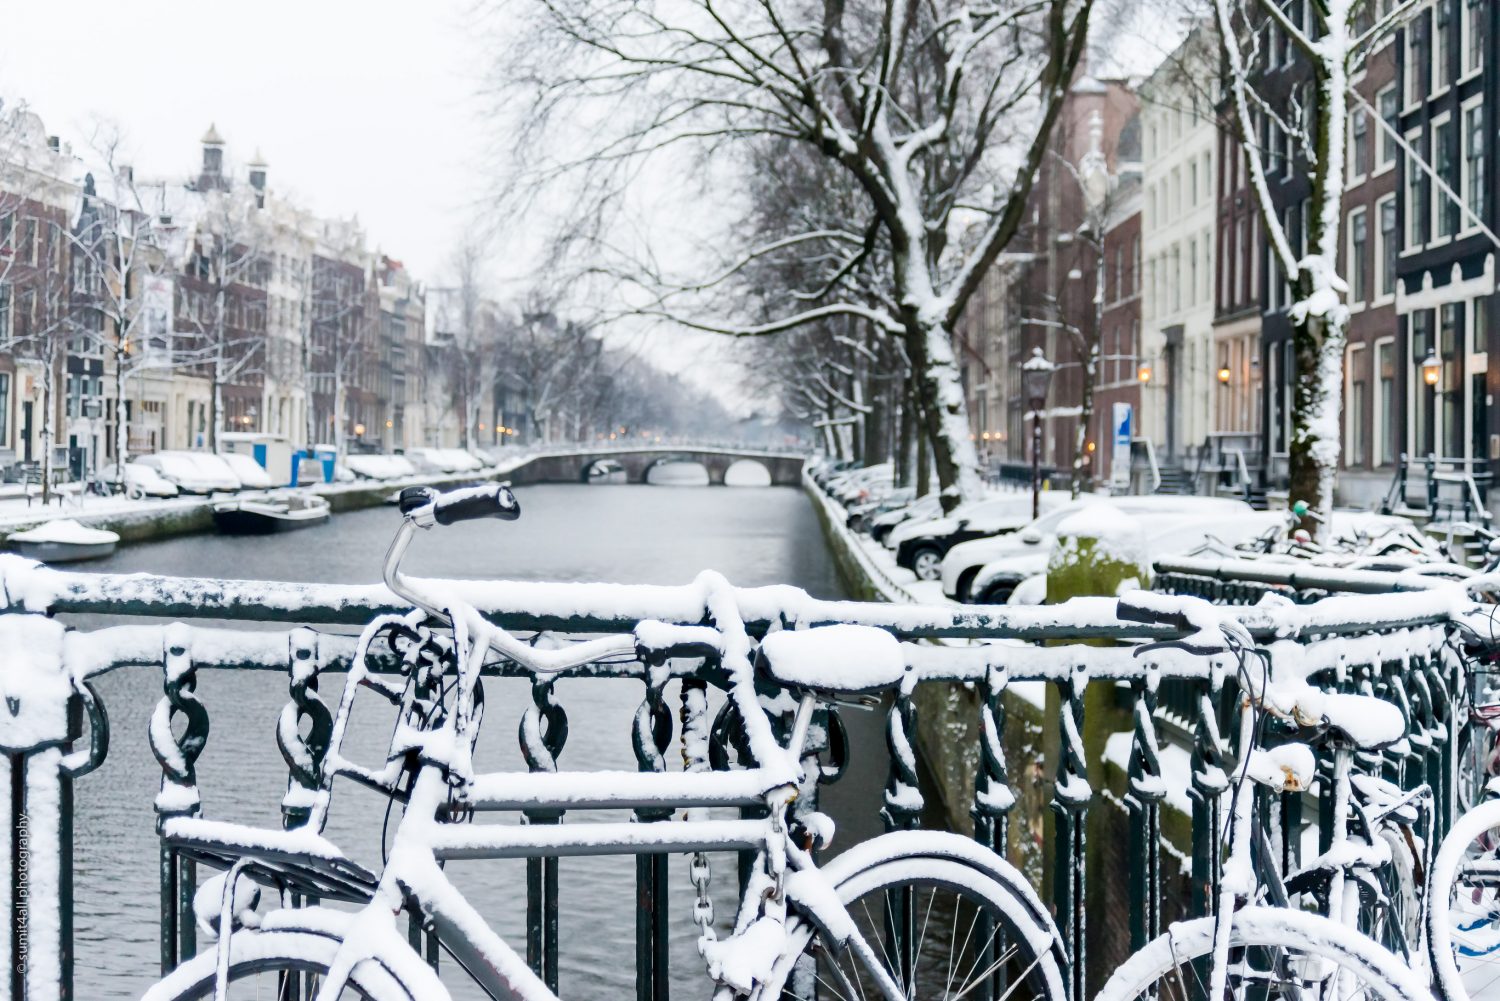 Bikes in Amsterdam After Fresh Snowfall in Winters